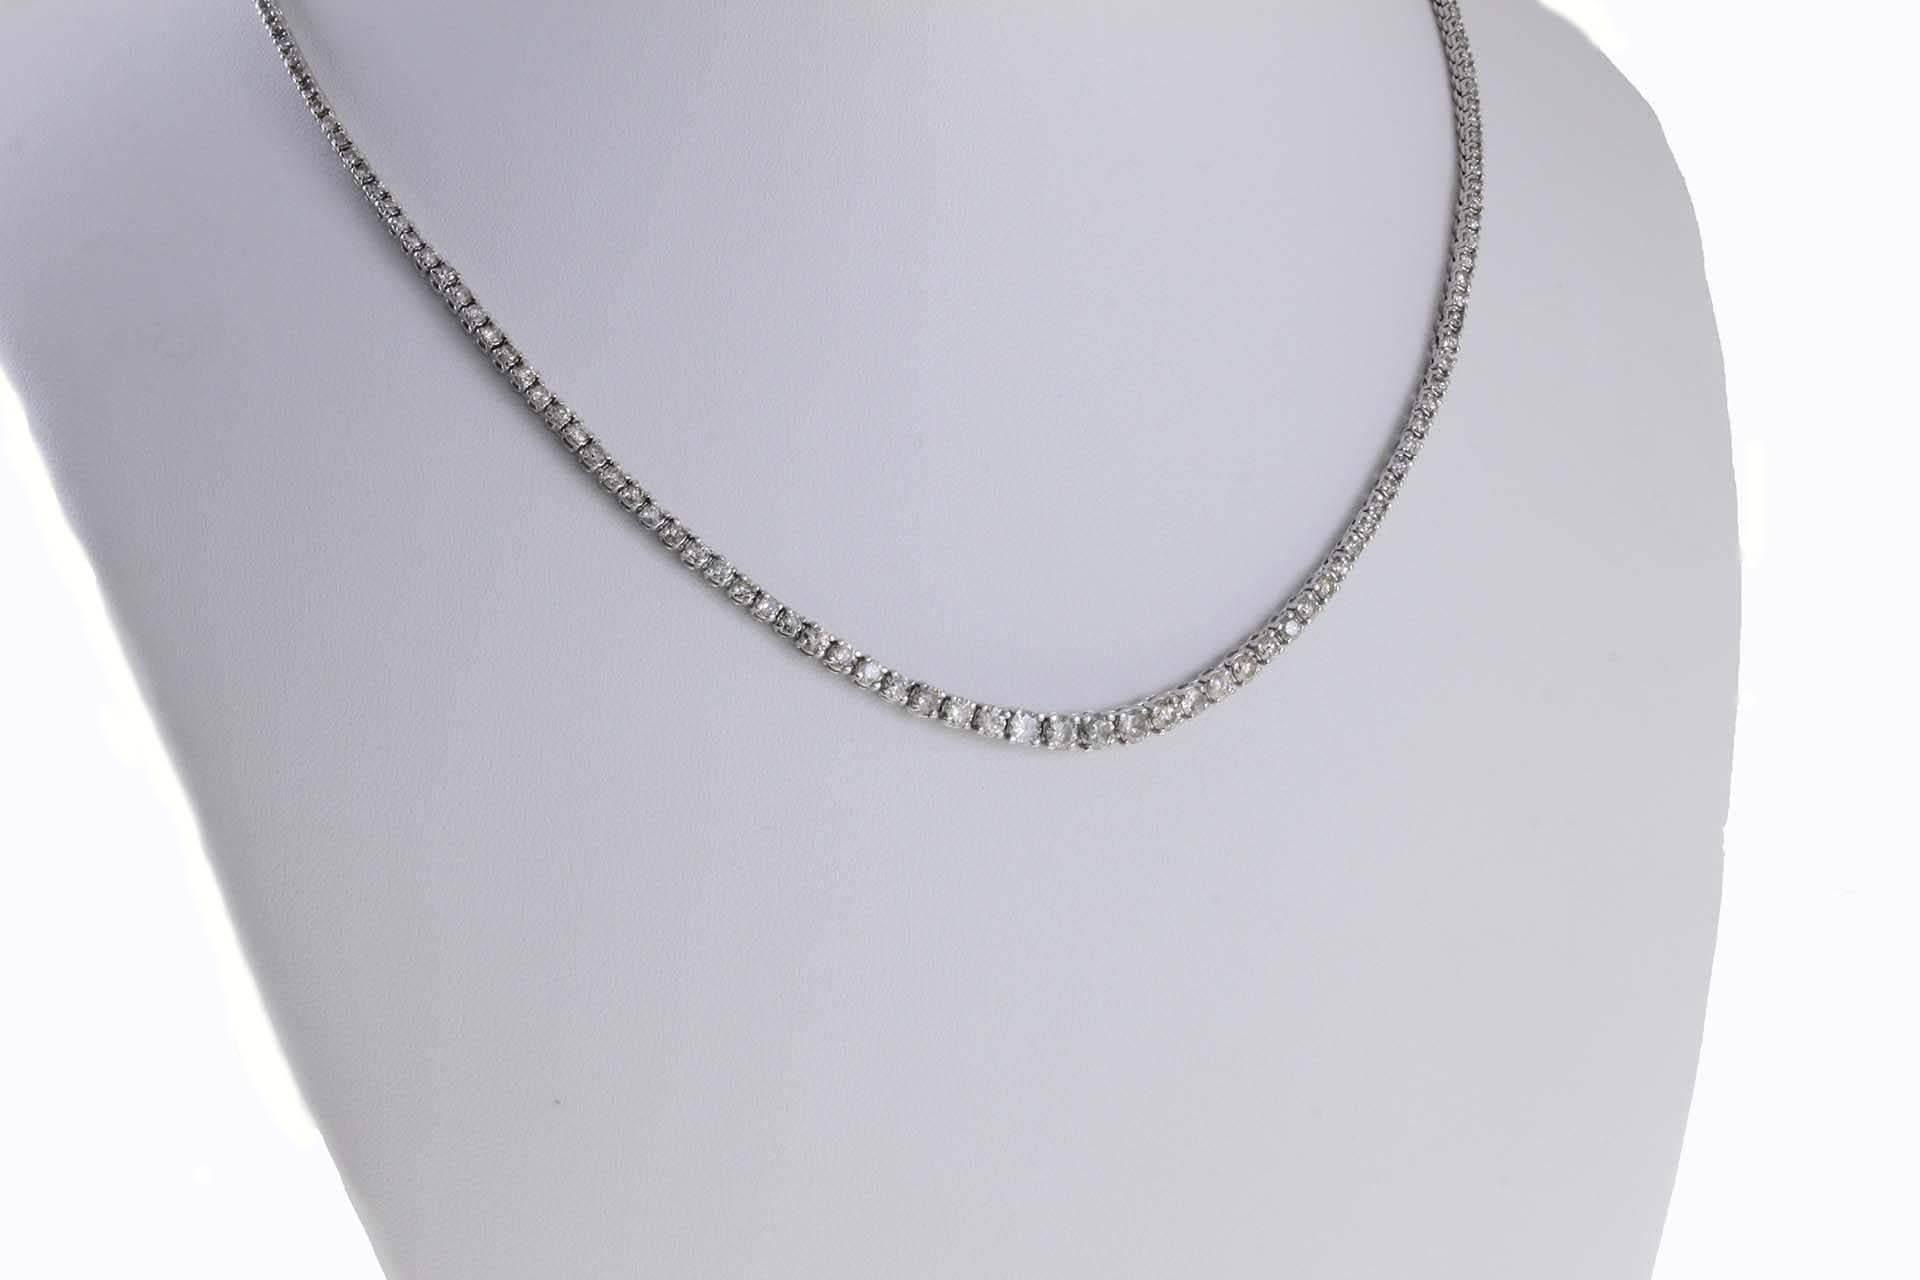 Elegant necklace in 9Kt white gold composed of a single strand of silver diamonds.

diamonds (4.79 Kt), 
tot weight 14.1gr
Rf.453978